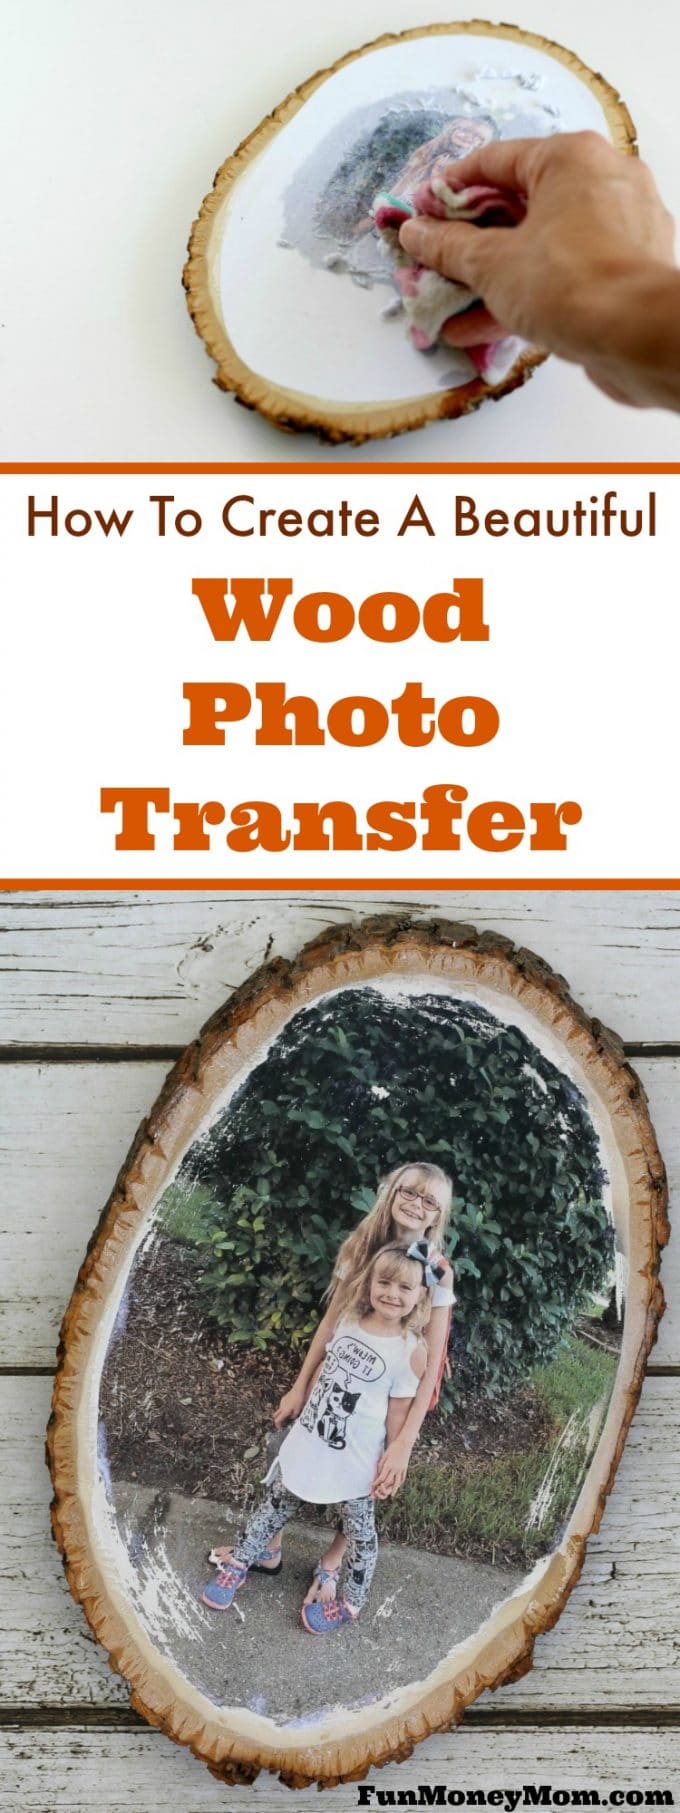 Whether you're looking for a creative photo gift, a new way to display family photos or just some fun personalized home decor, this DIY Wood Photo Transfer is perfect (and you won't believe how easy it is).